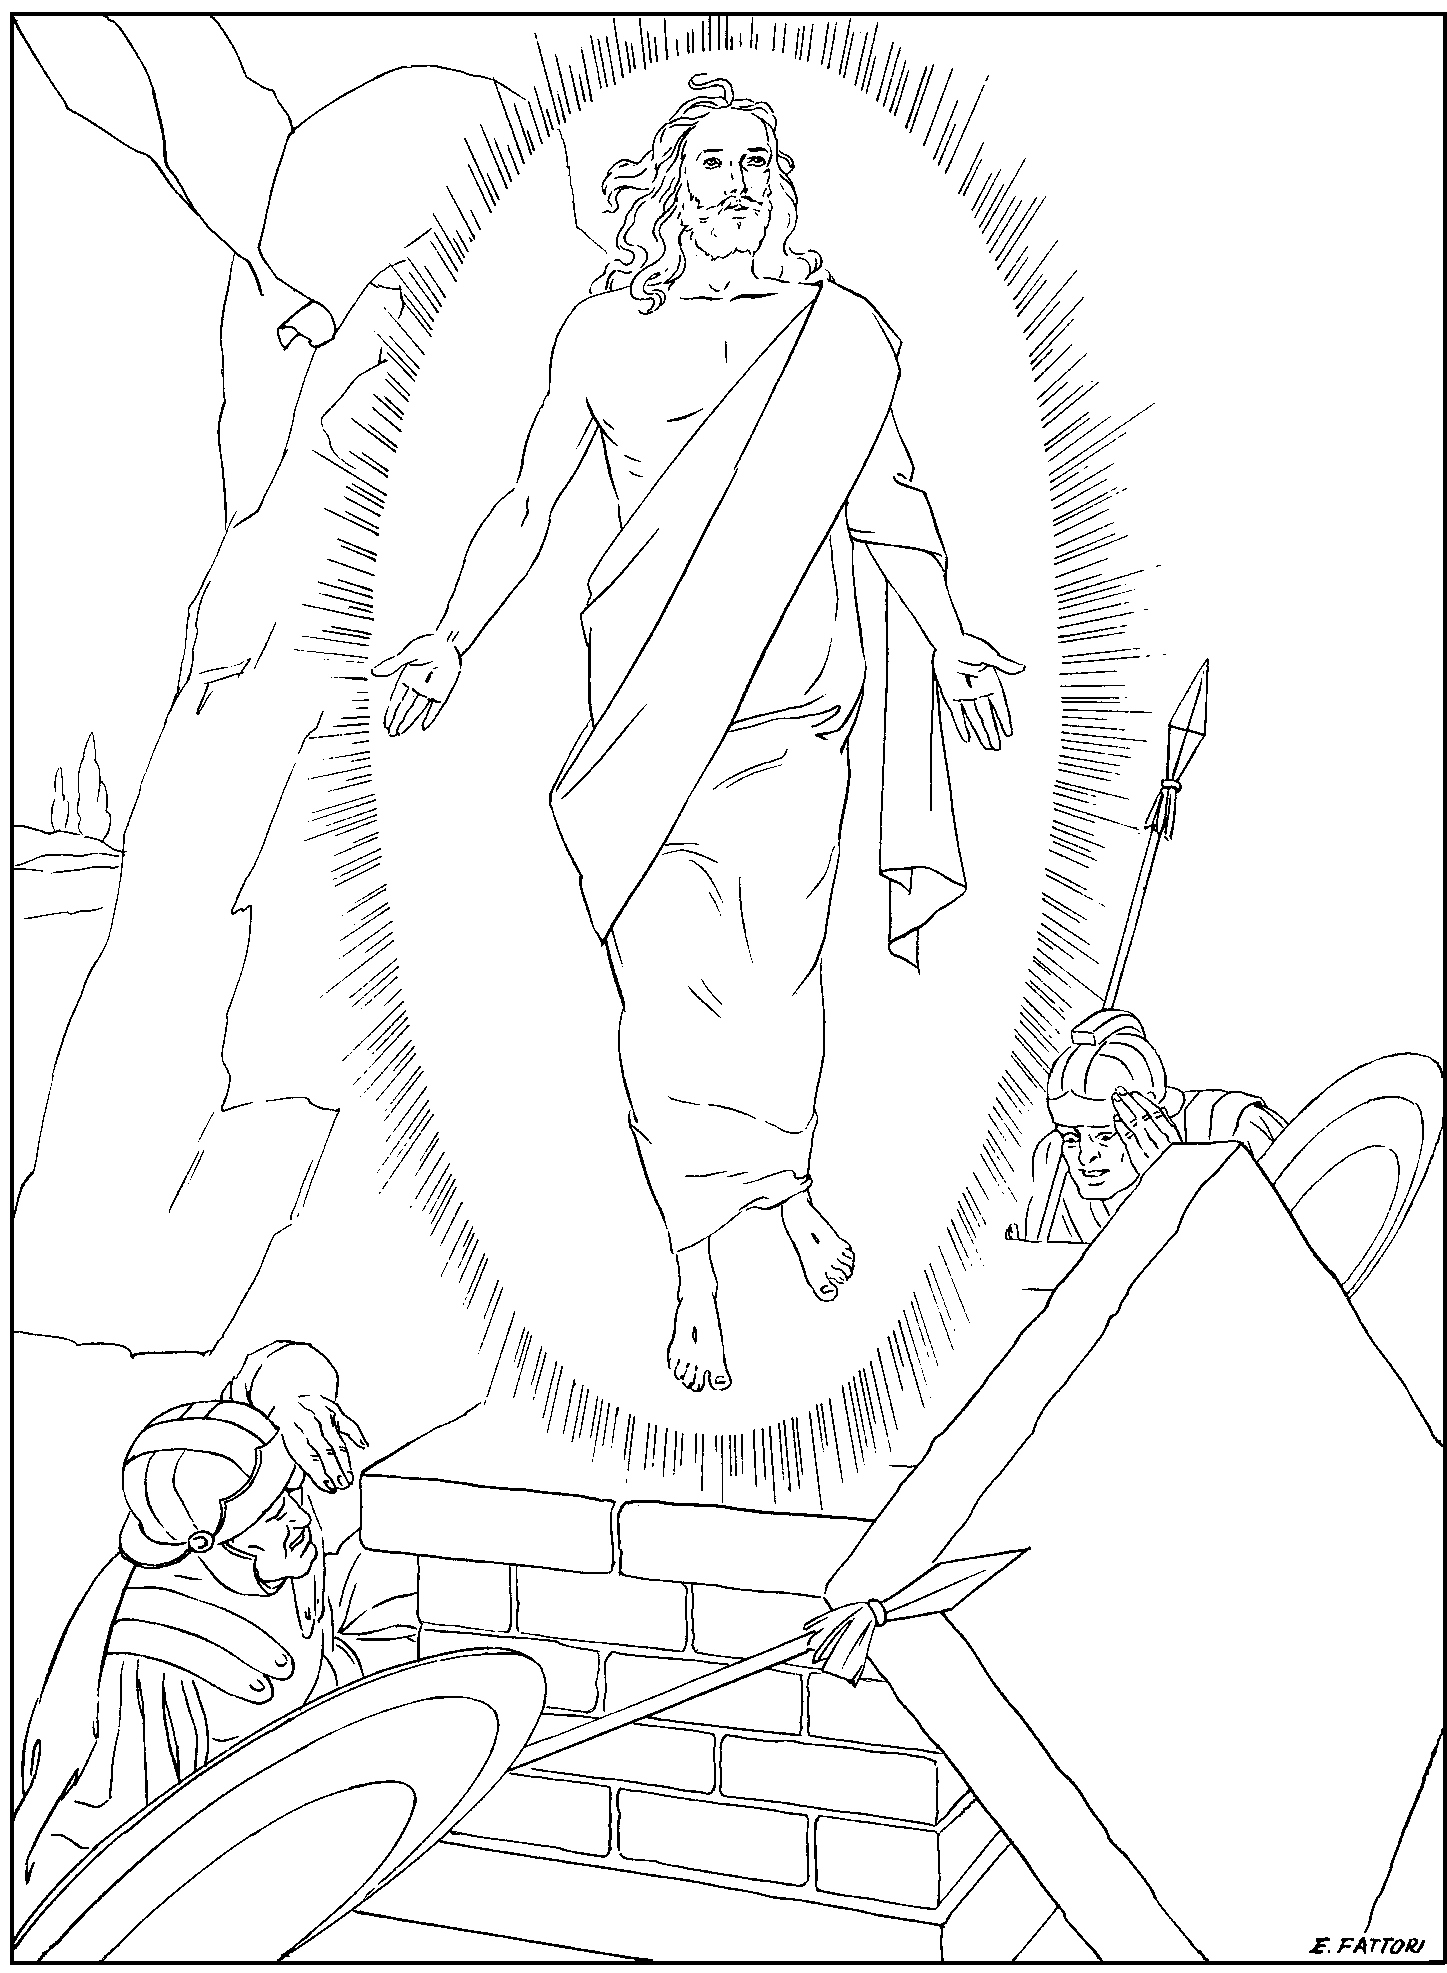 Rosary coloring pages â family in feast and feria